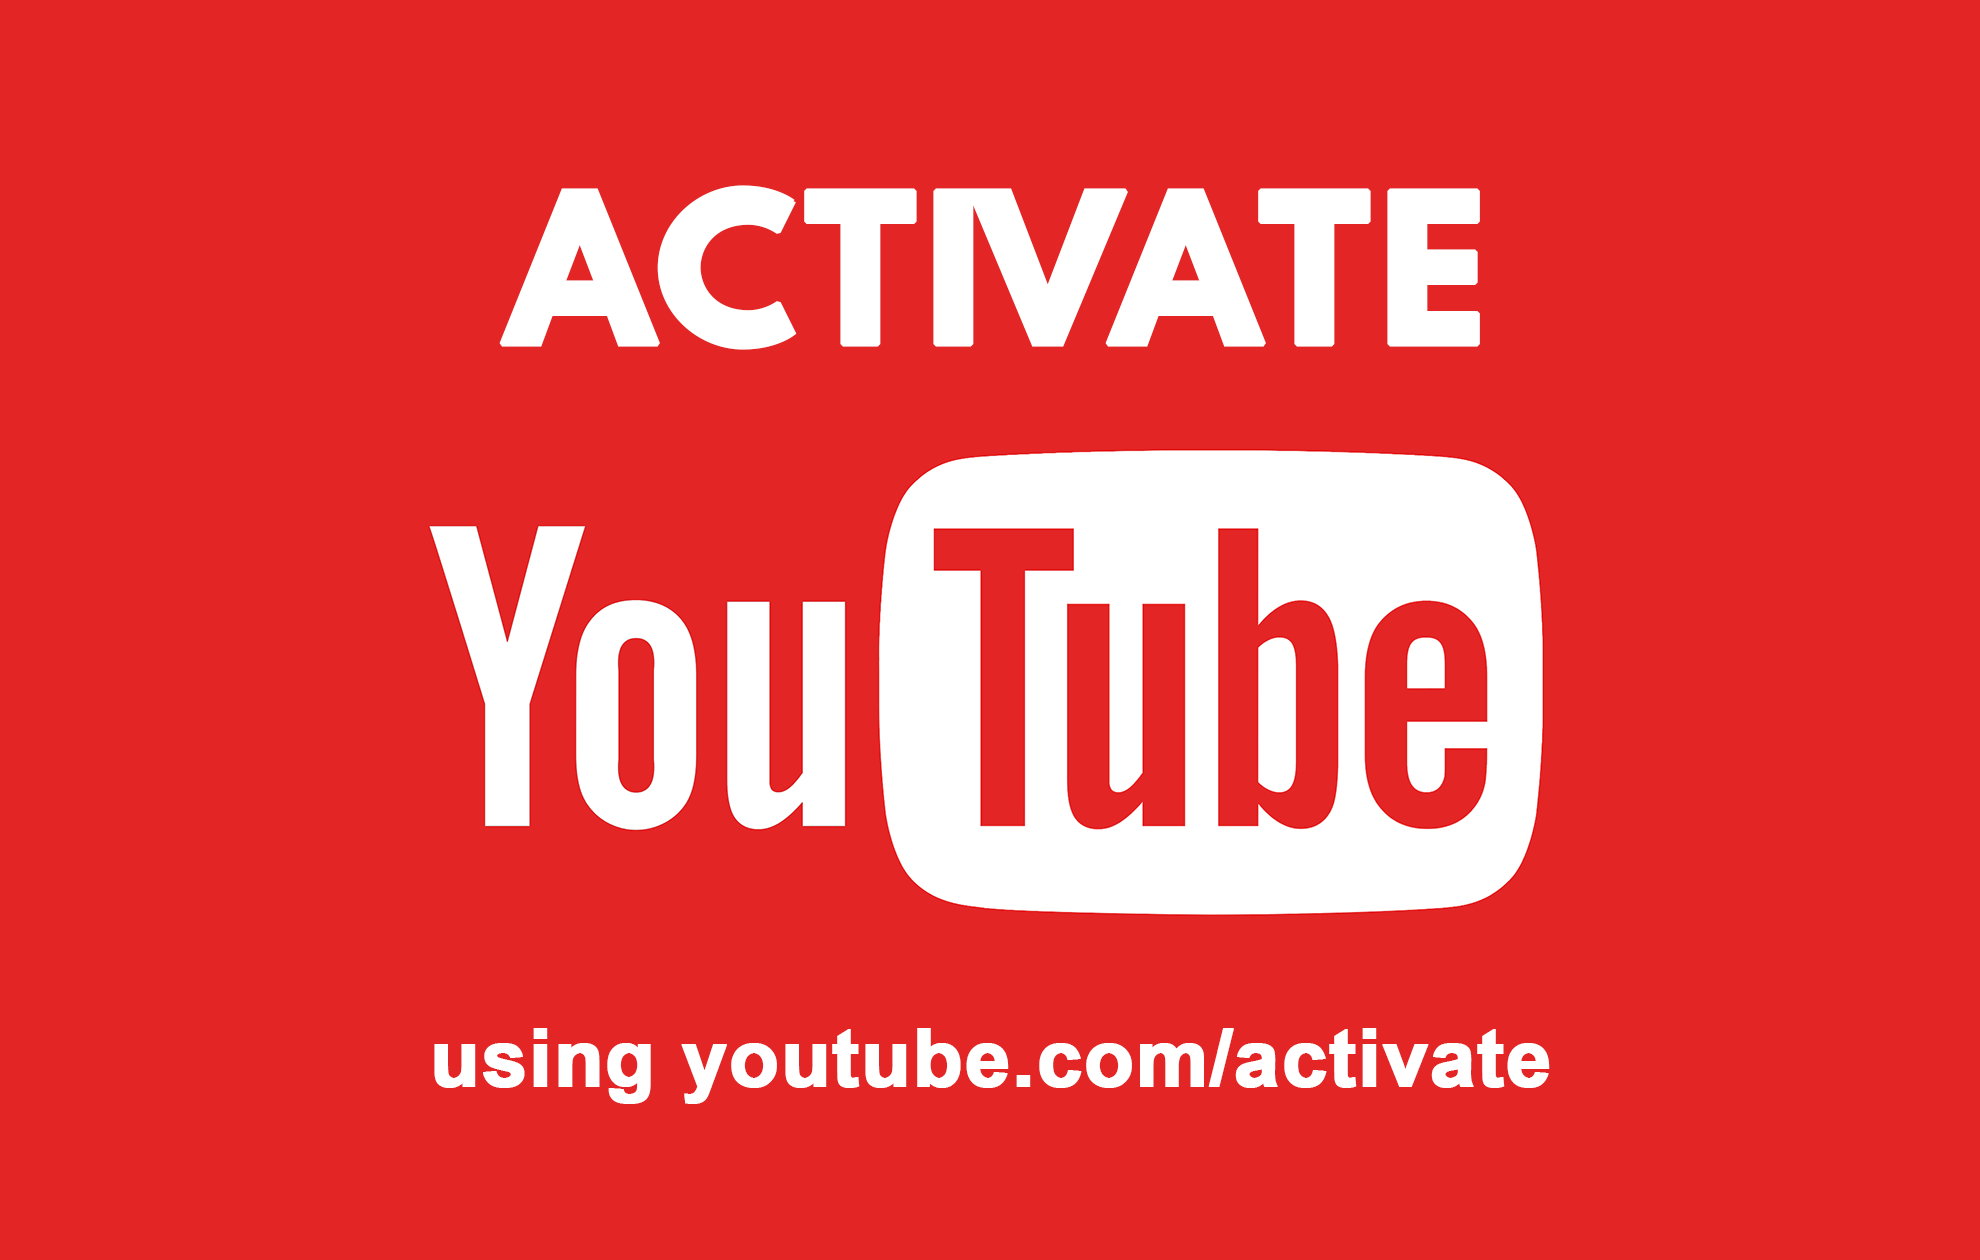 How to Activate YouTube on Your Devices